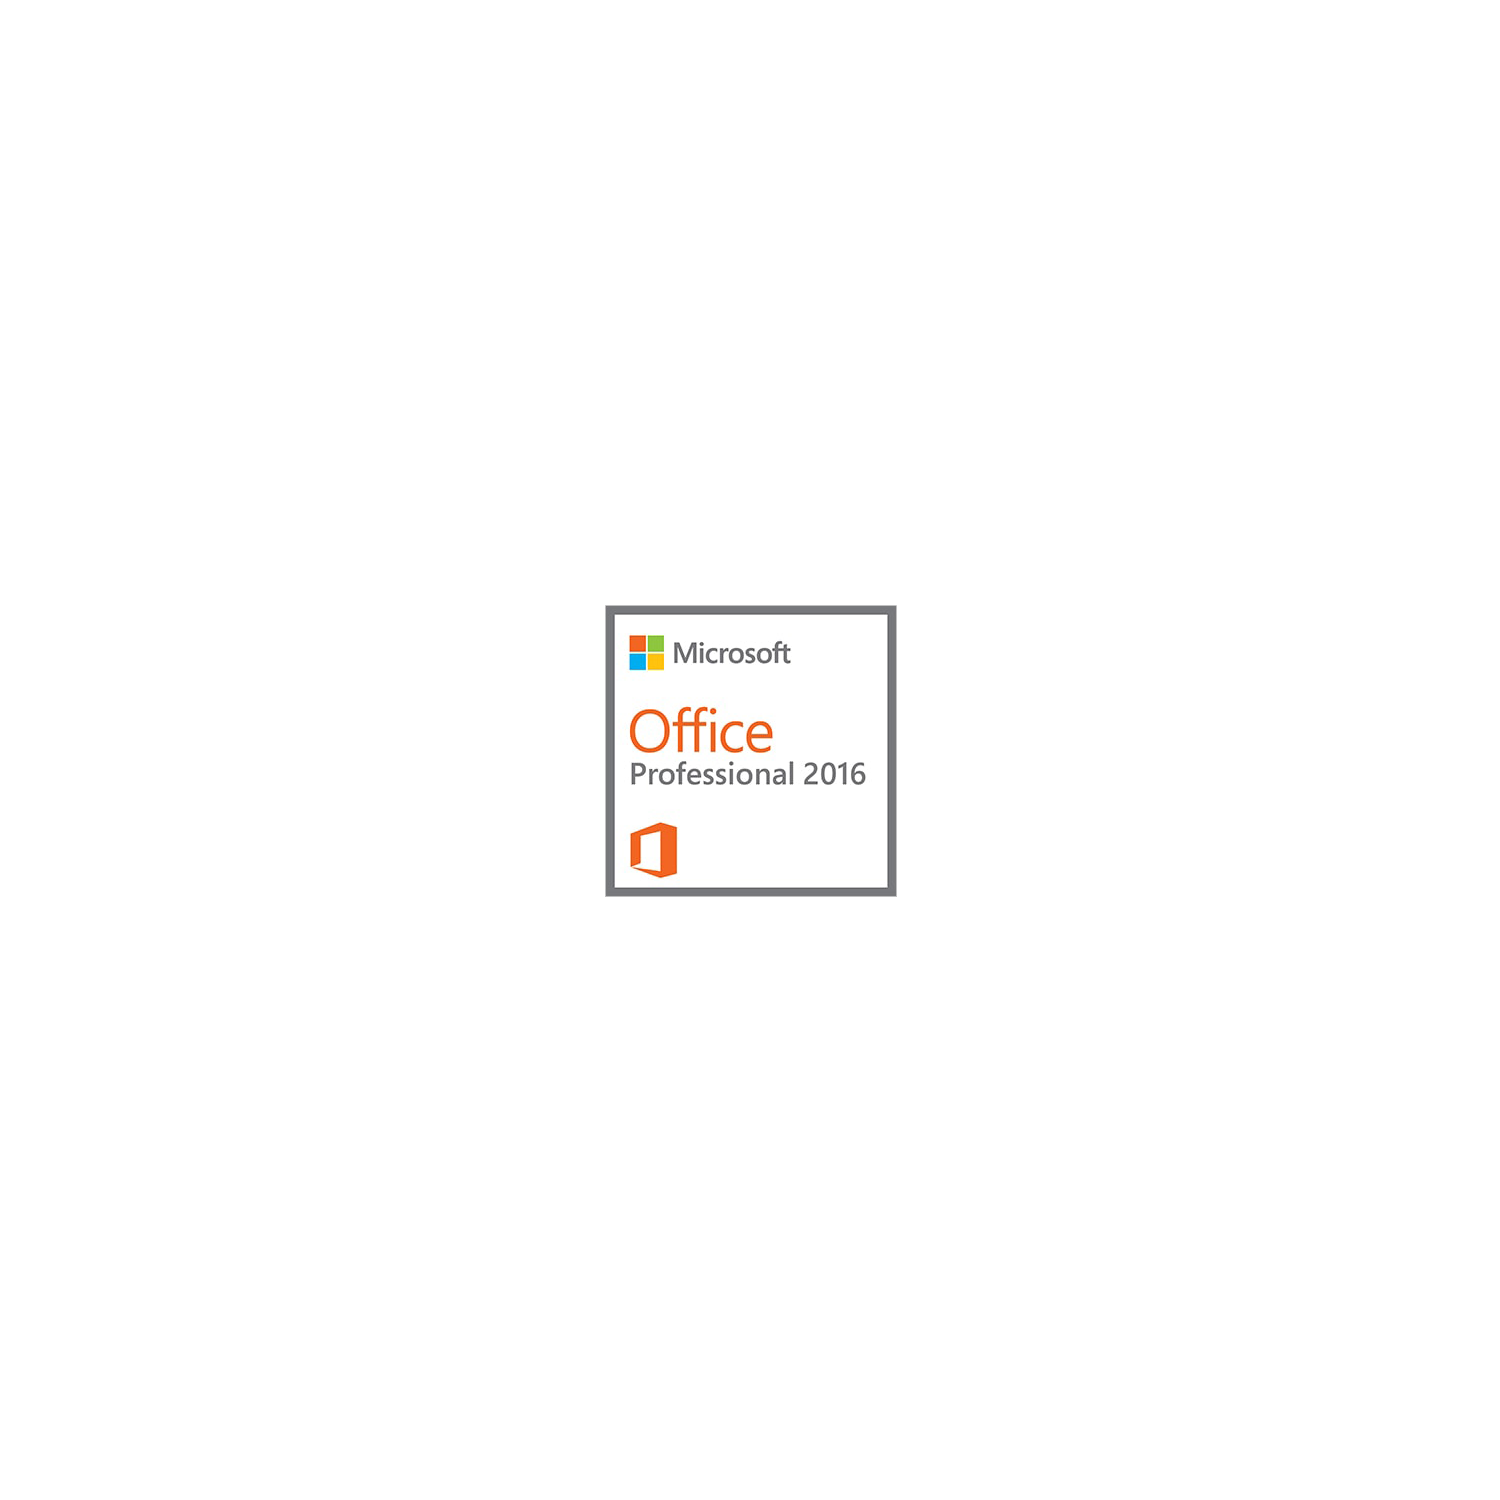 Microsoft Office 2016 Professional Download